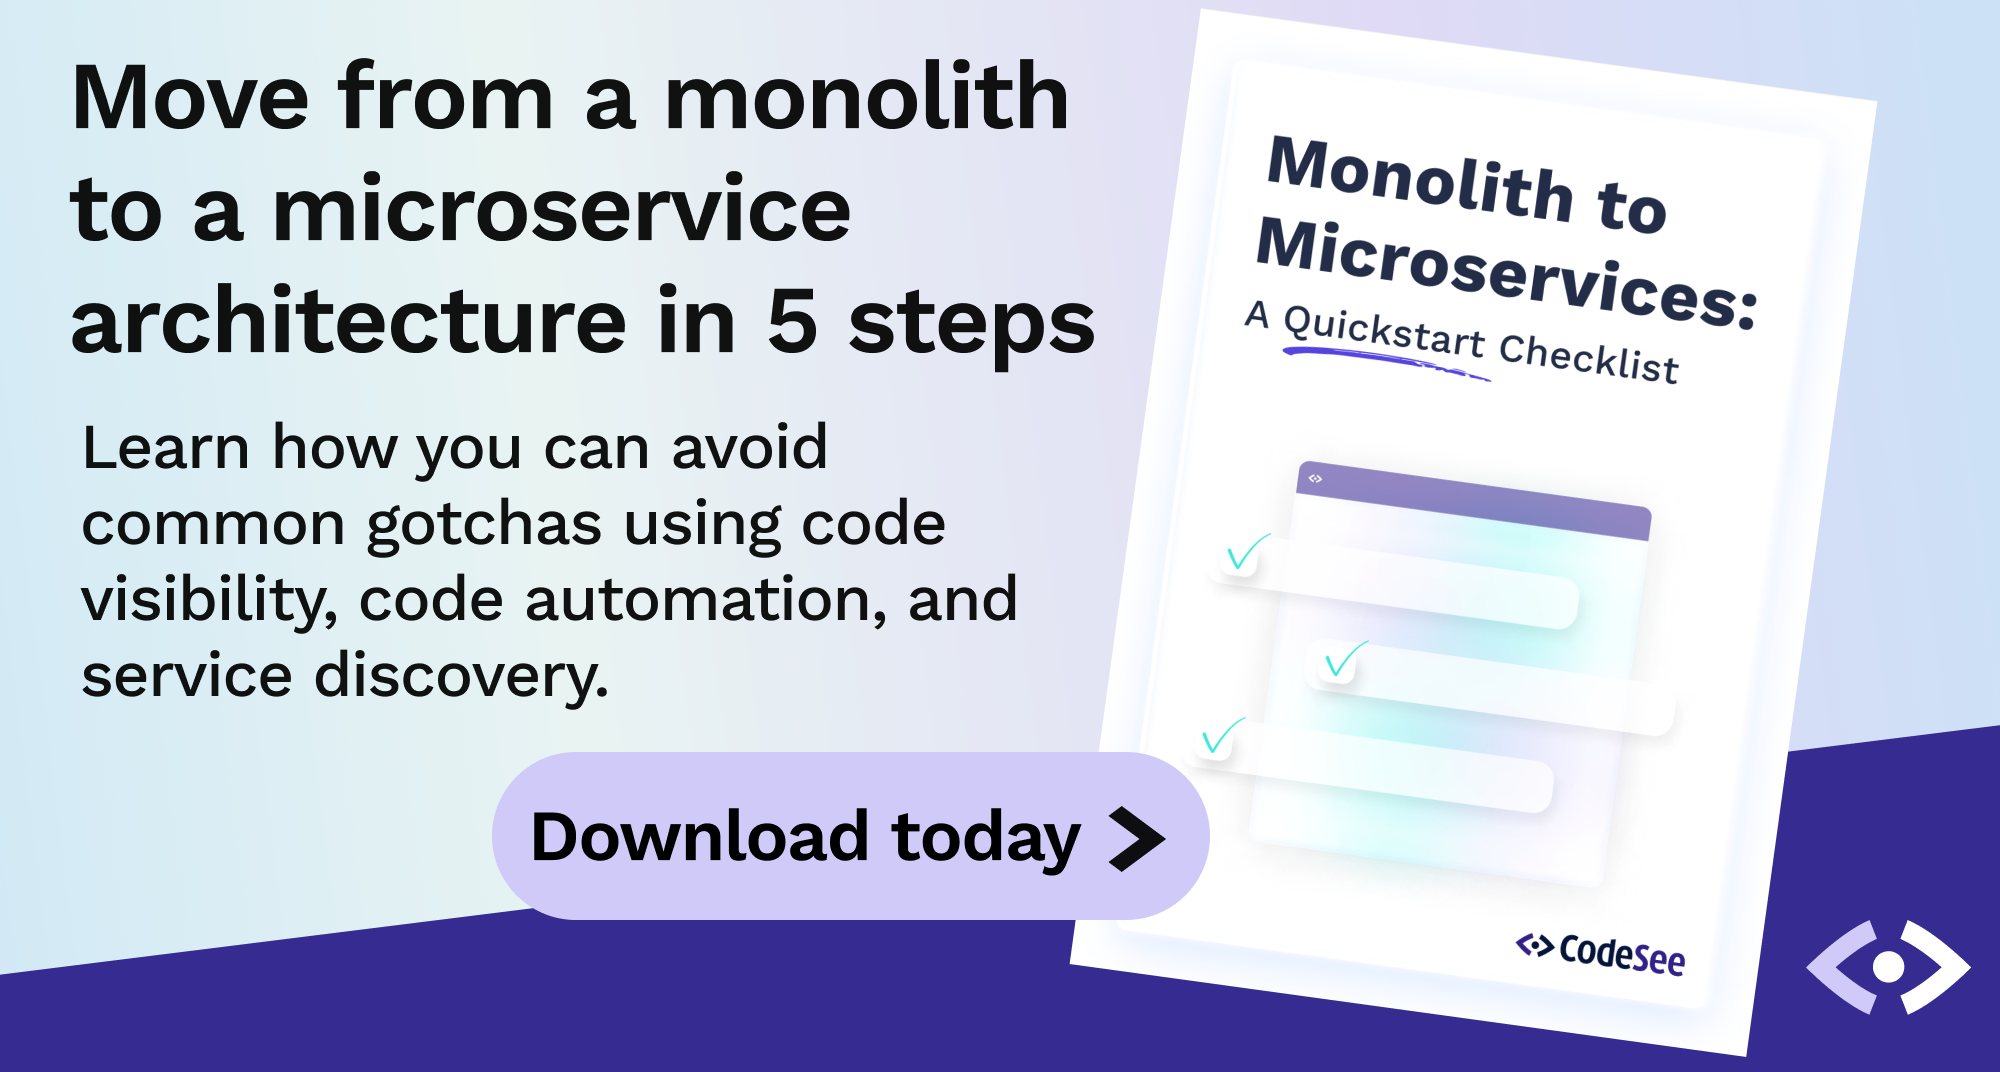 Move from a monolith to a microservice architecture in 5 steps. Download Monolith to Microservices: A Quickstart Checklist today.